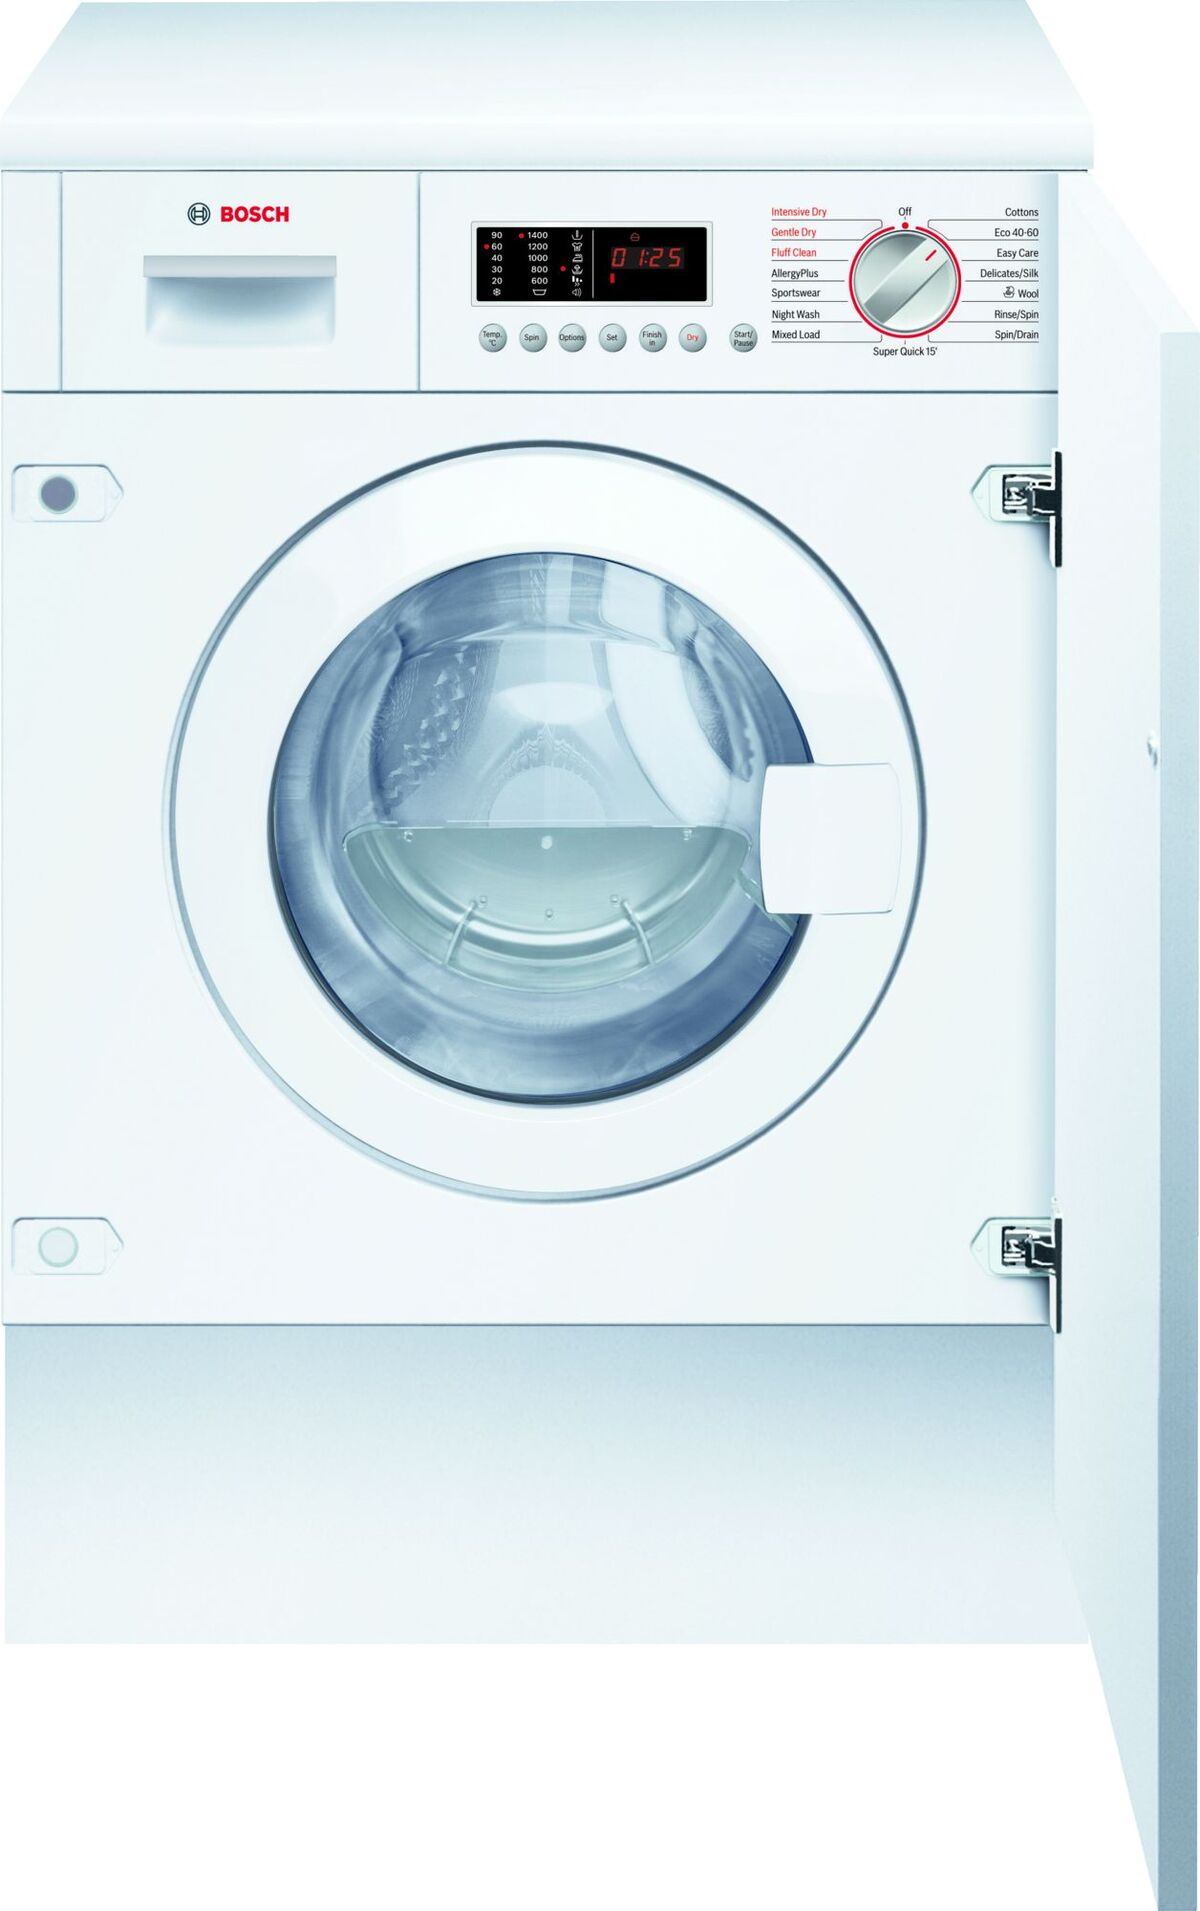 WKD28542GB BOSCH Built In Washer Dryer - 7Kg Wash - 4Kg Dry - 1400 Spin - White/Integrated